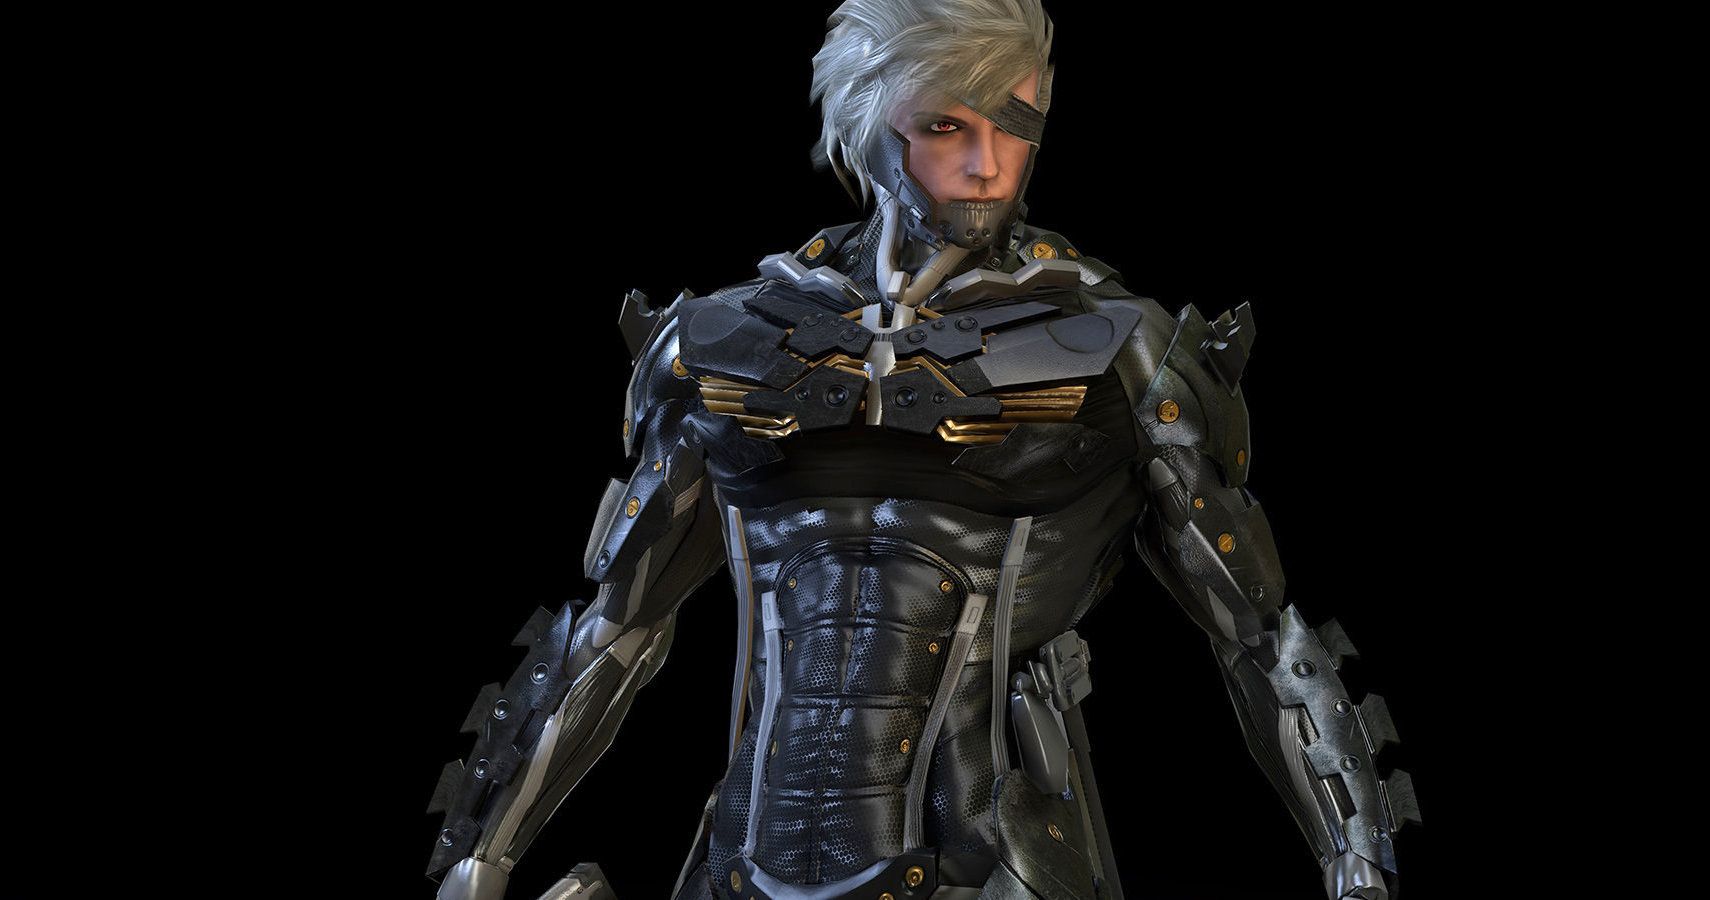 Why Is Raiden In Mgs3